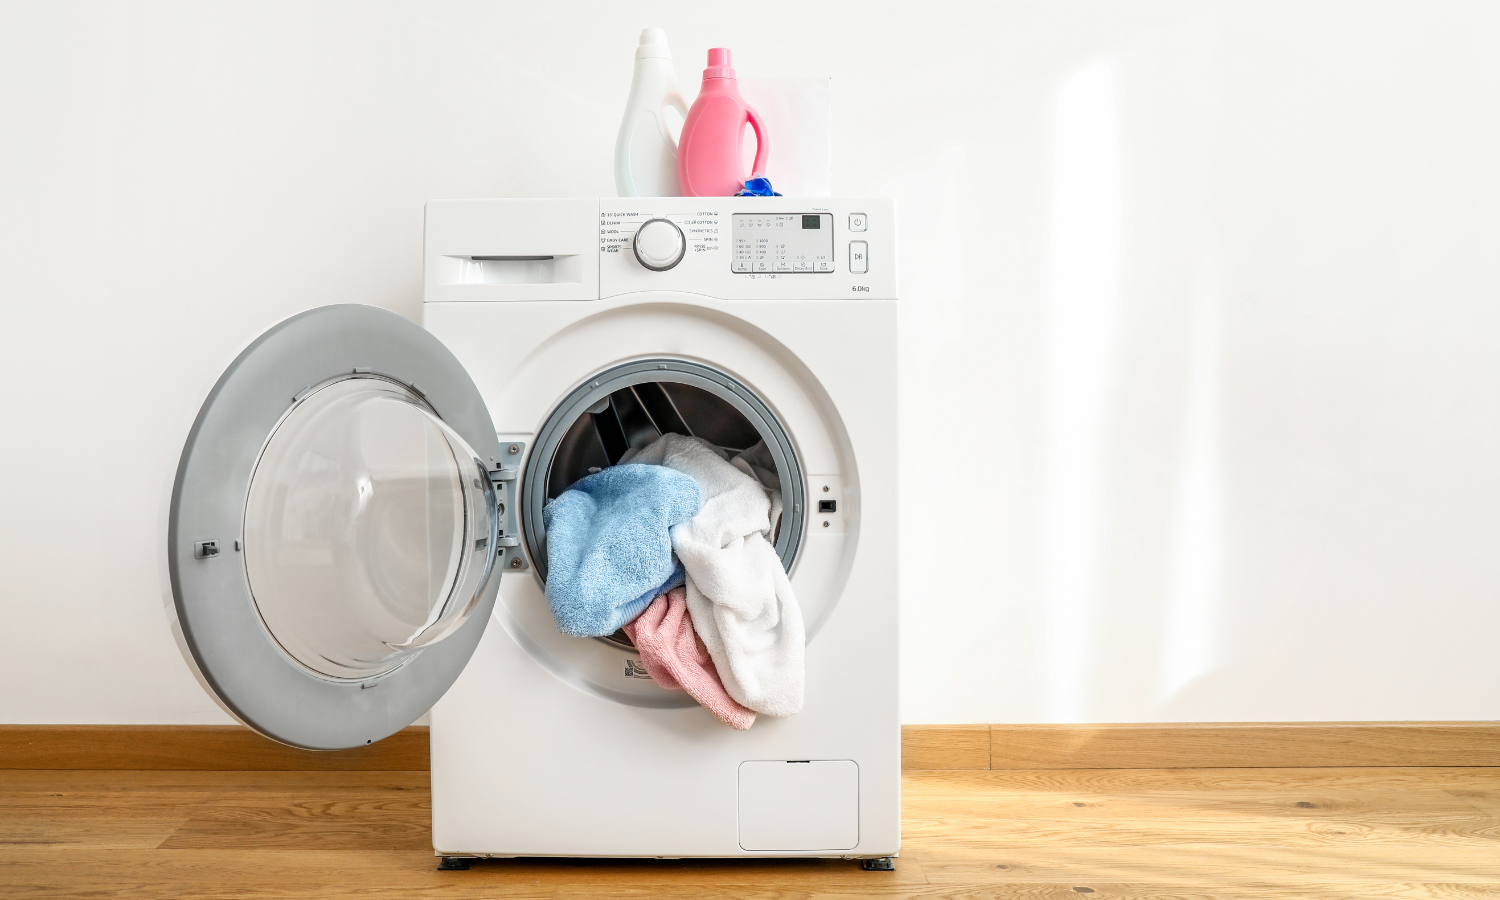 Cleaning your washing machine